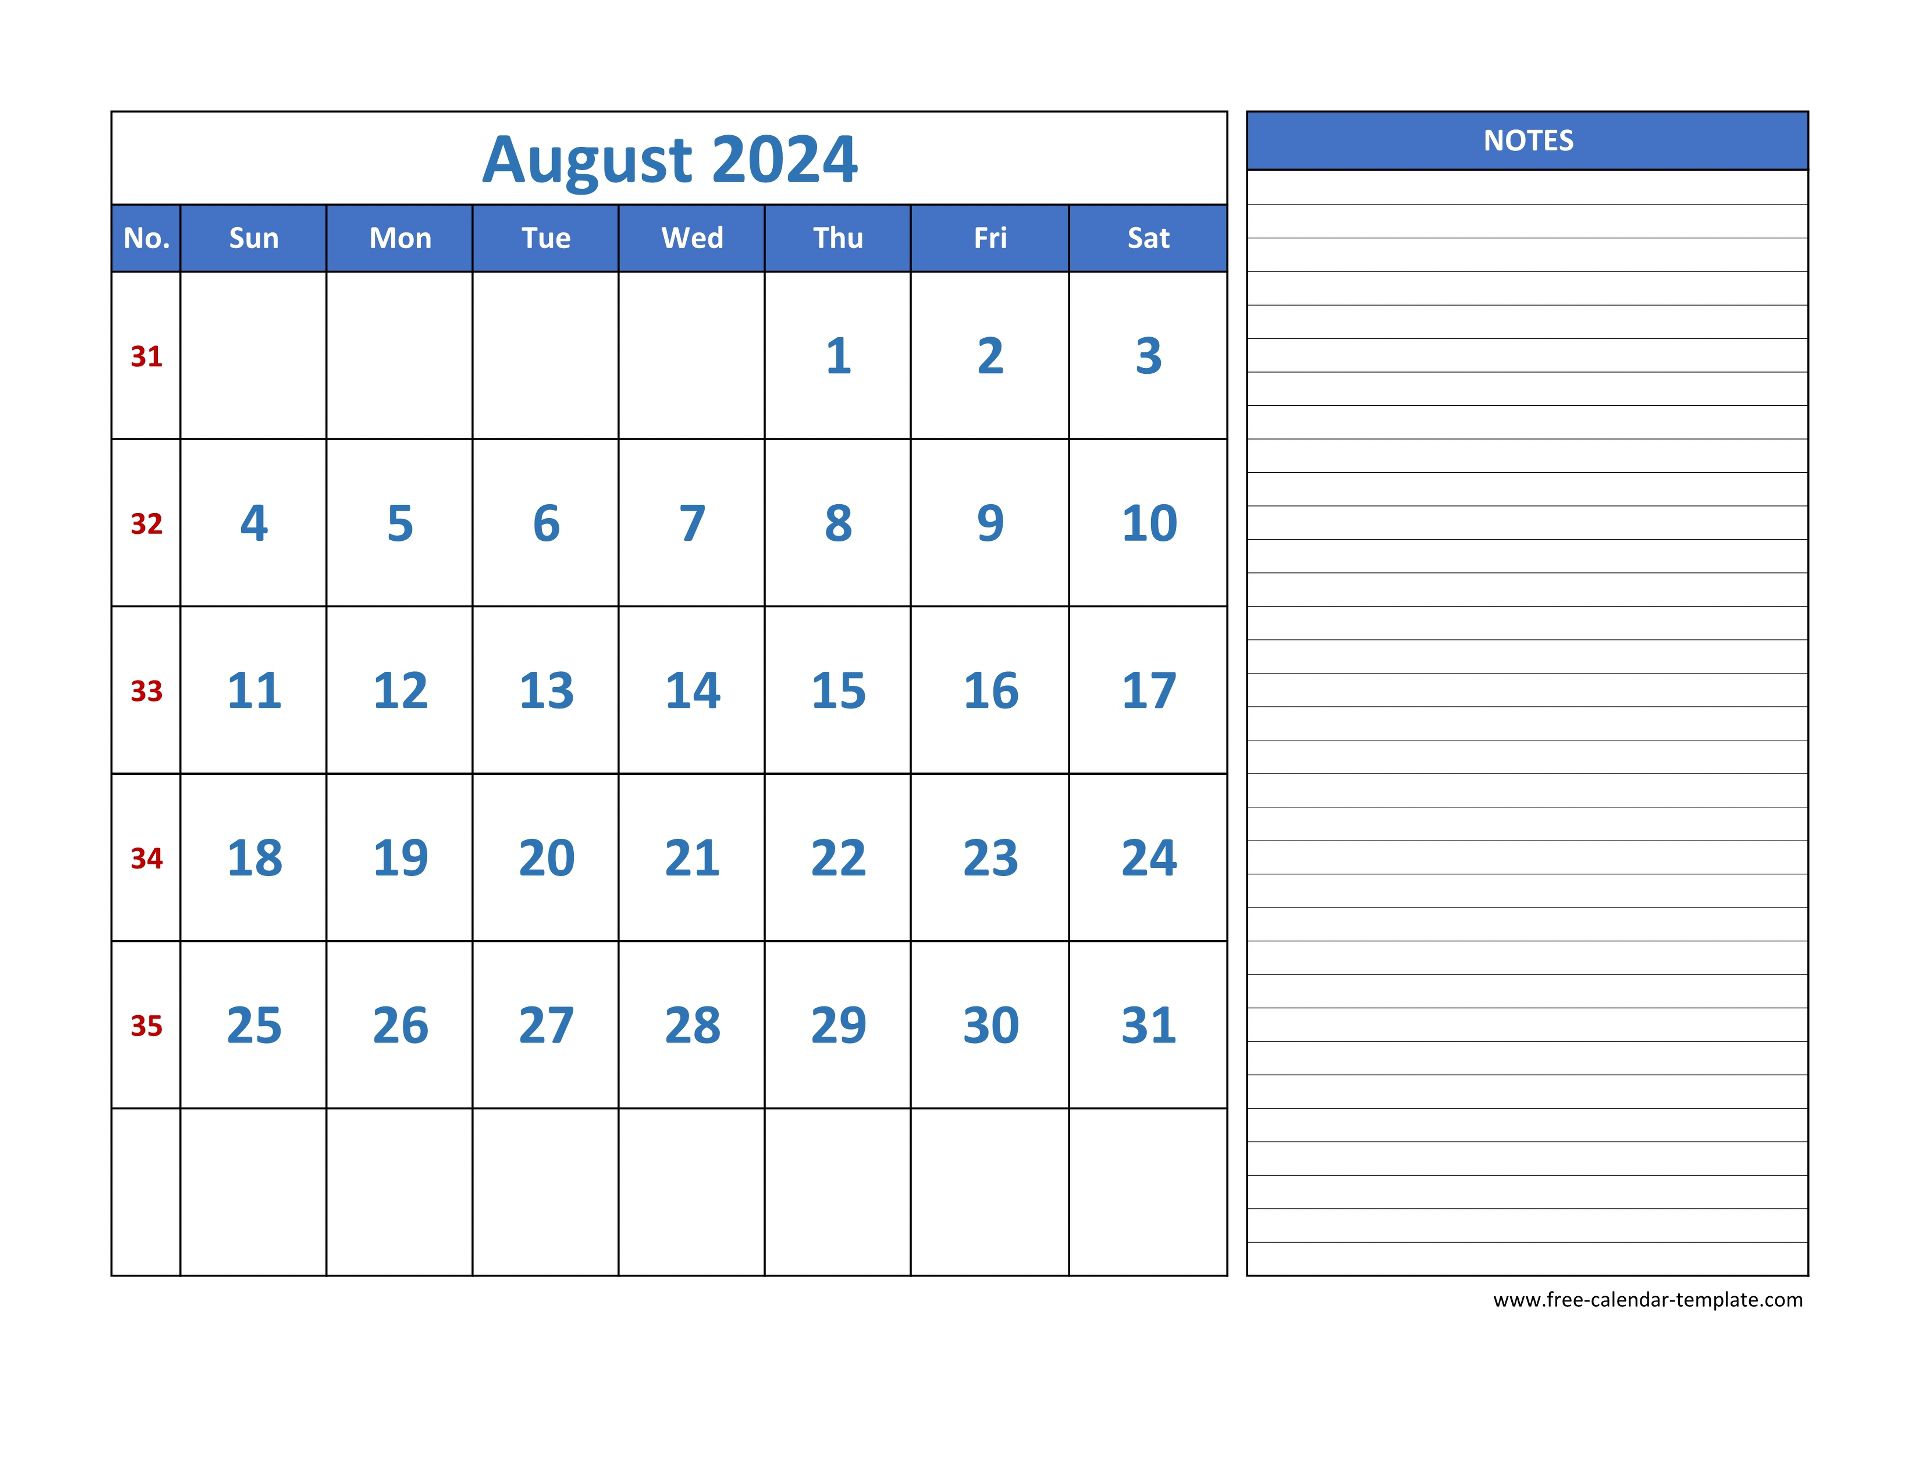 August Calendar 2024 grid lines for holidays and notes (horizontal